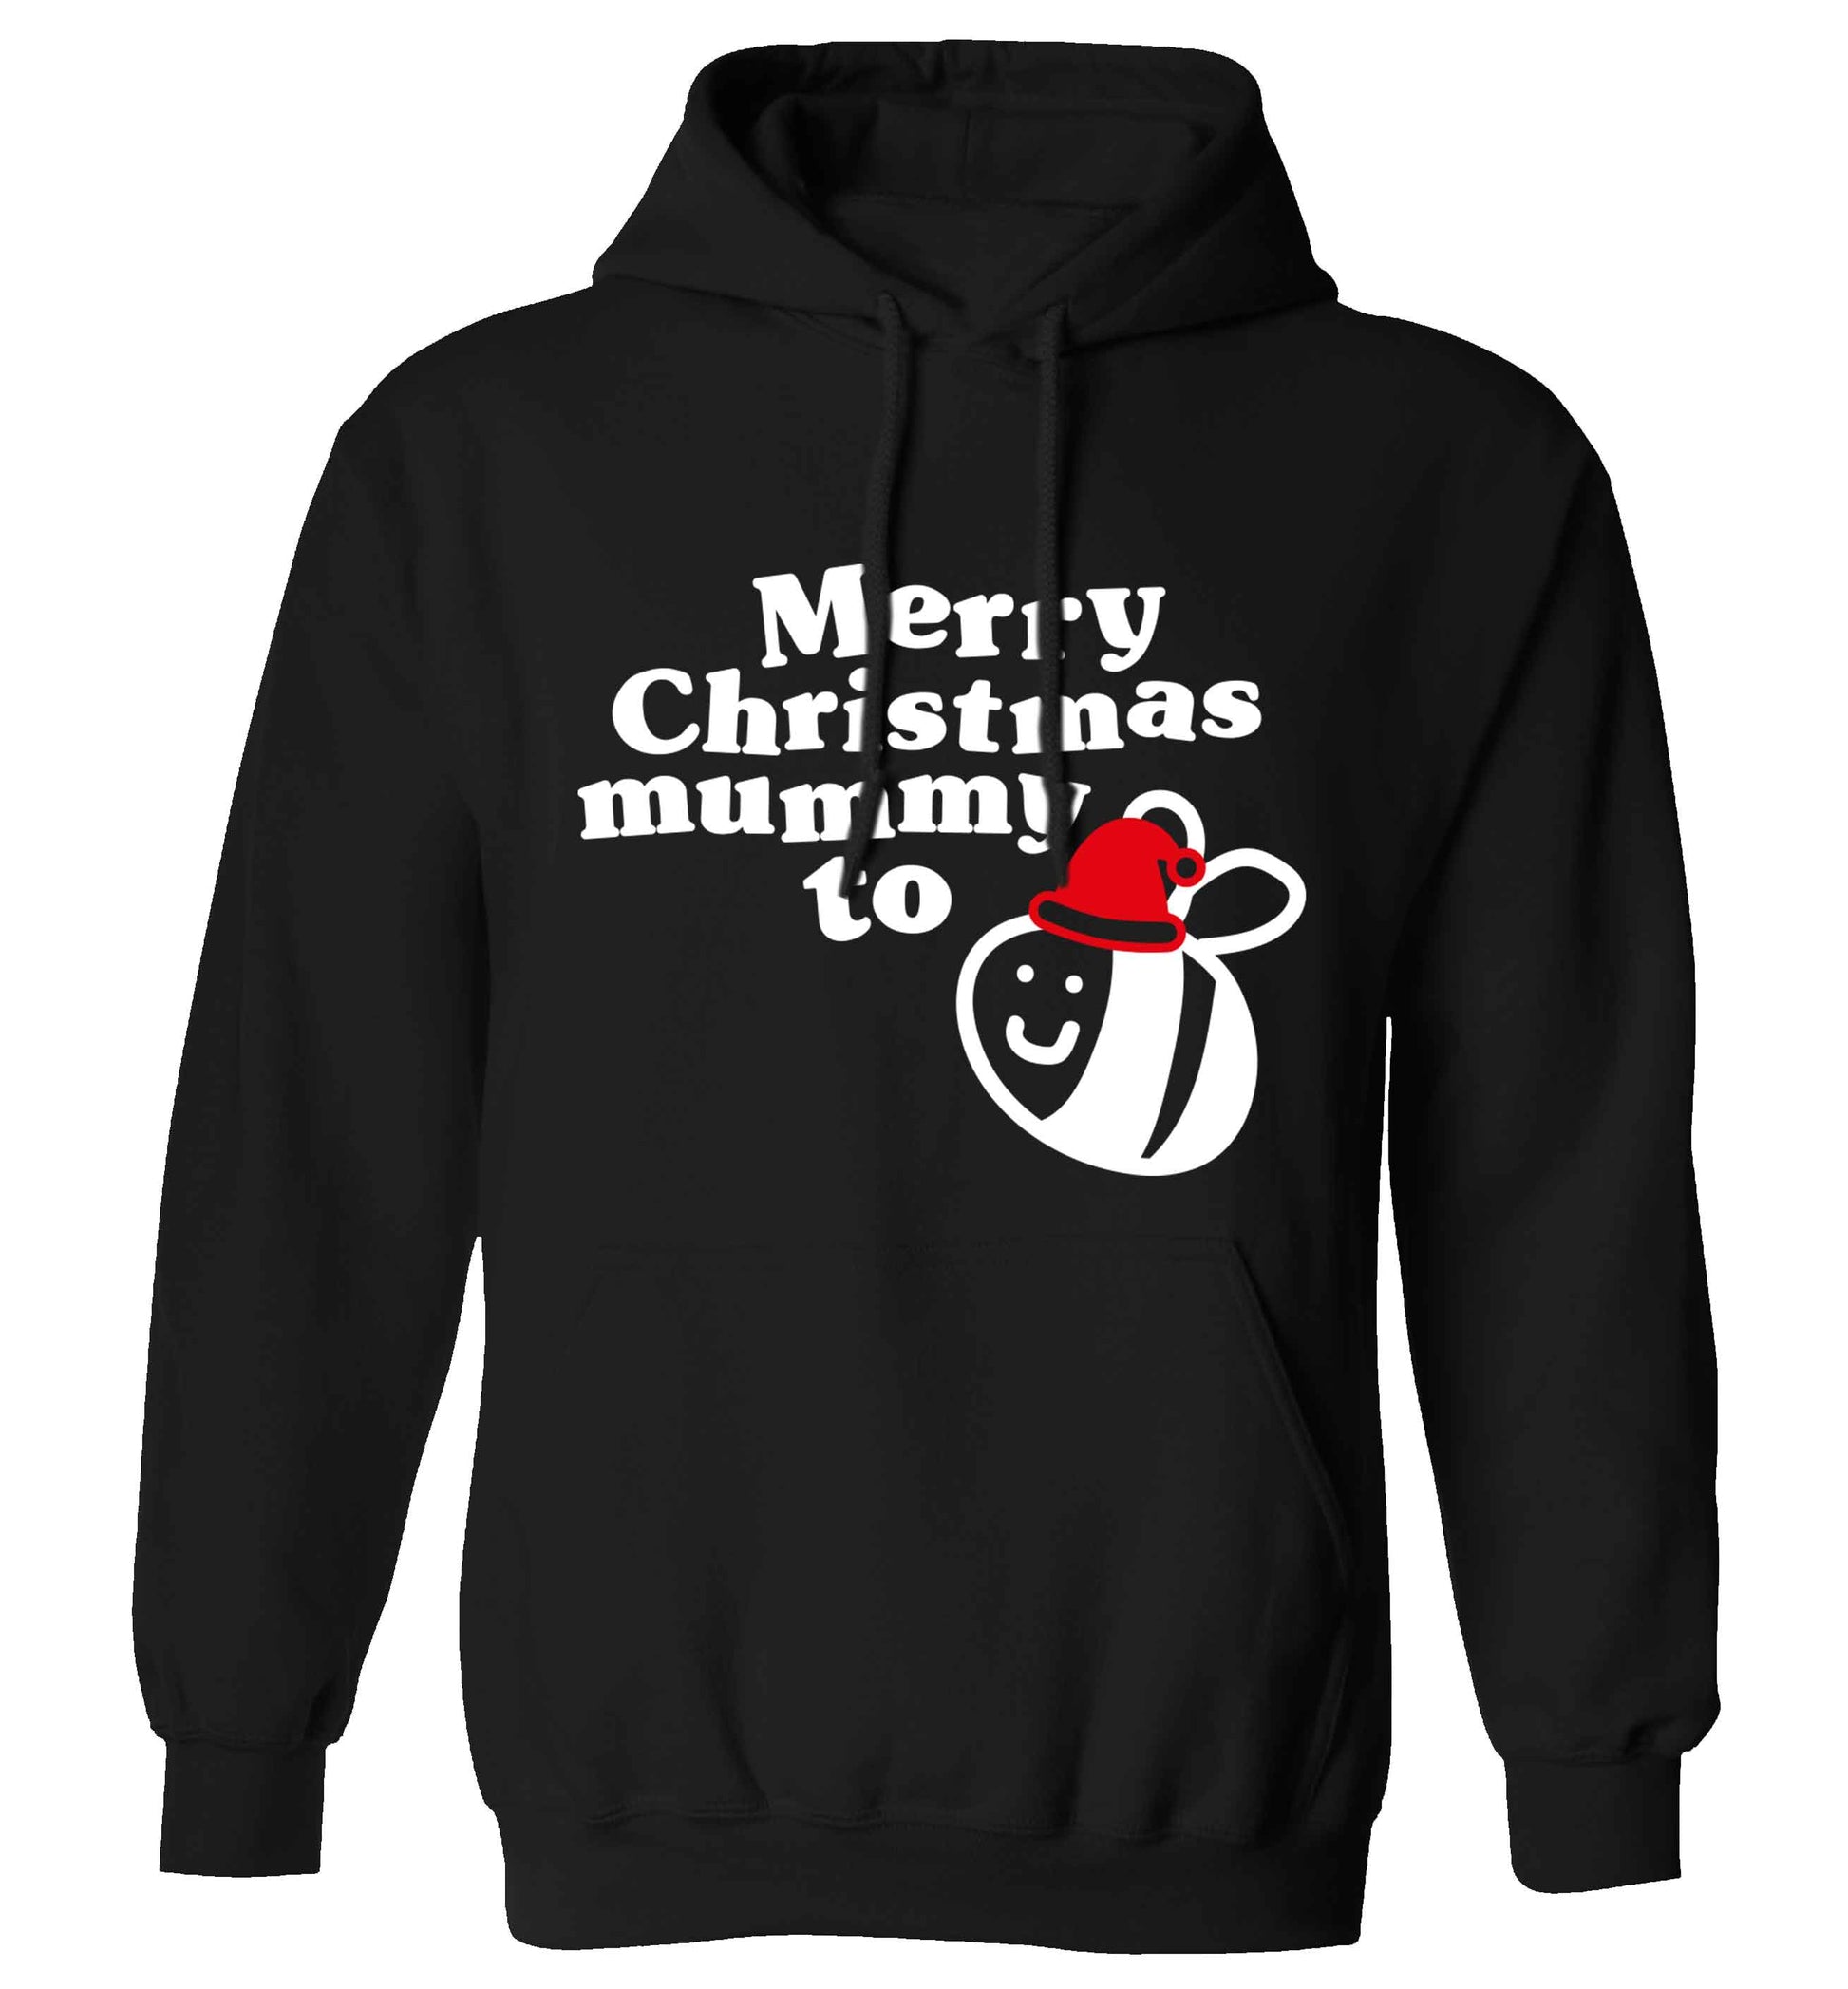 Merry Christmas mummy to be adults unisex black hoodie 2XL